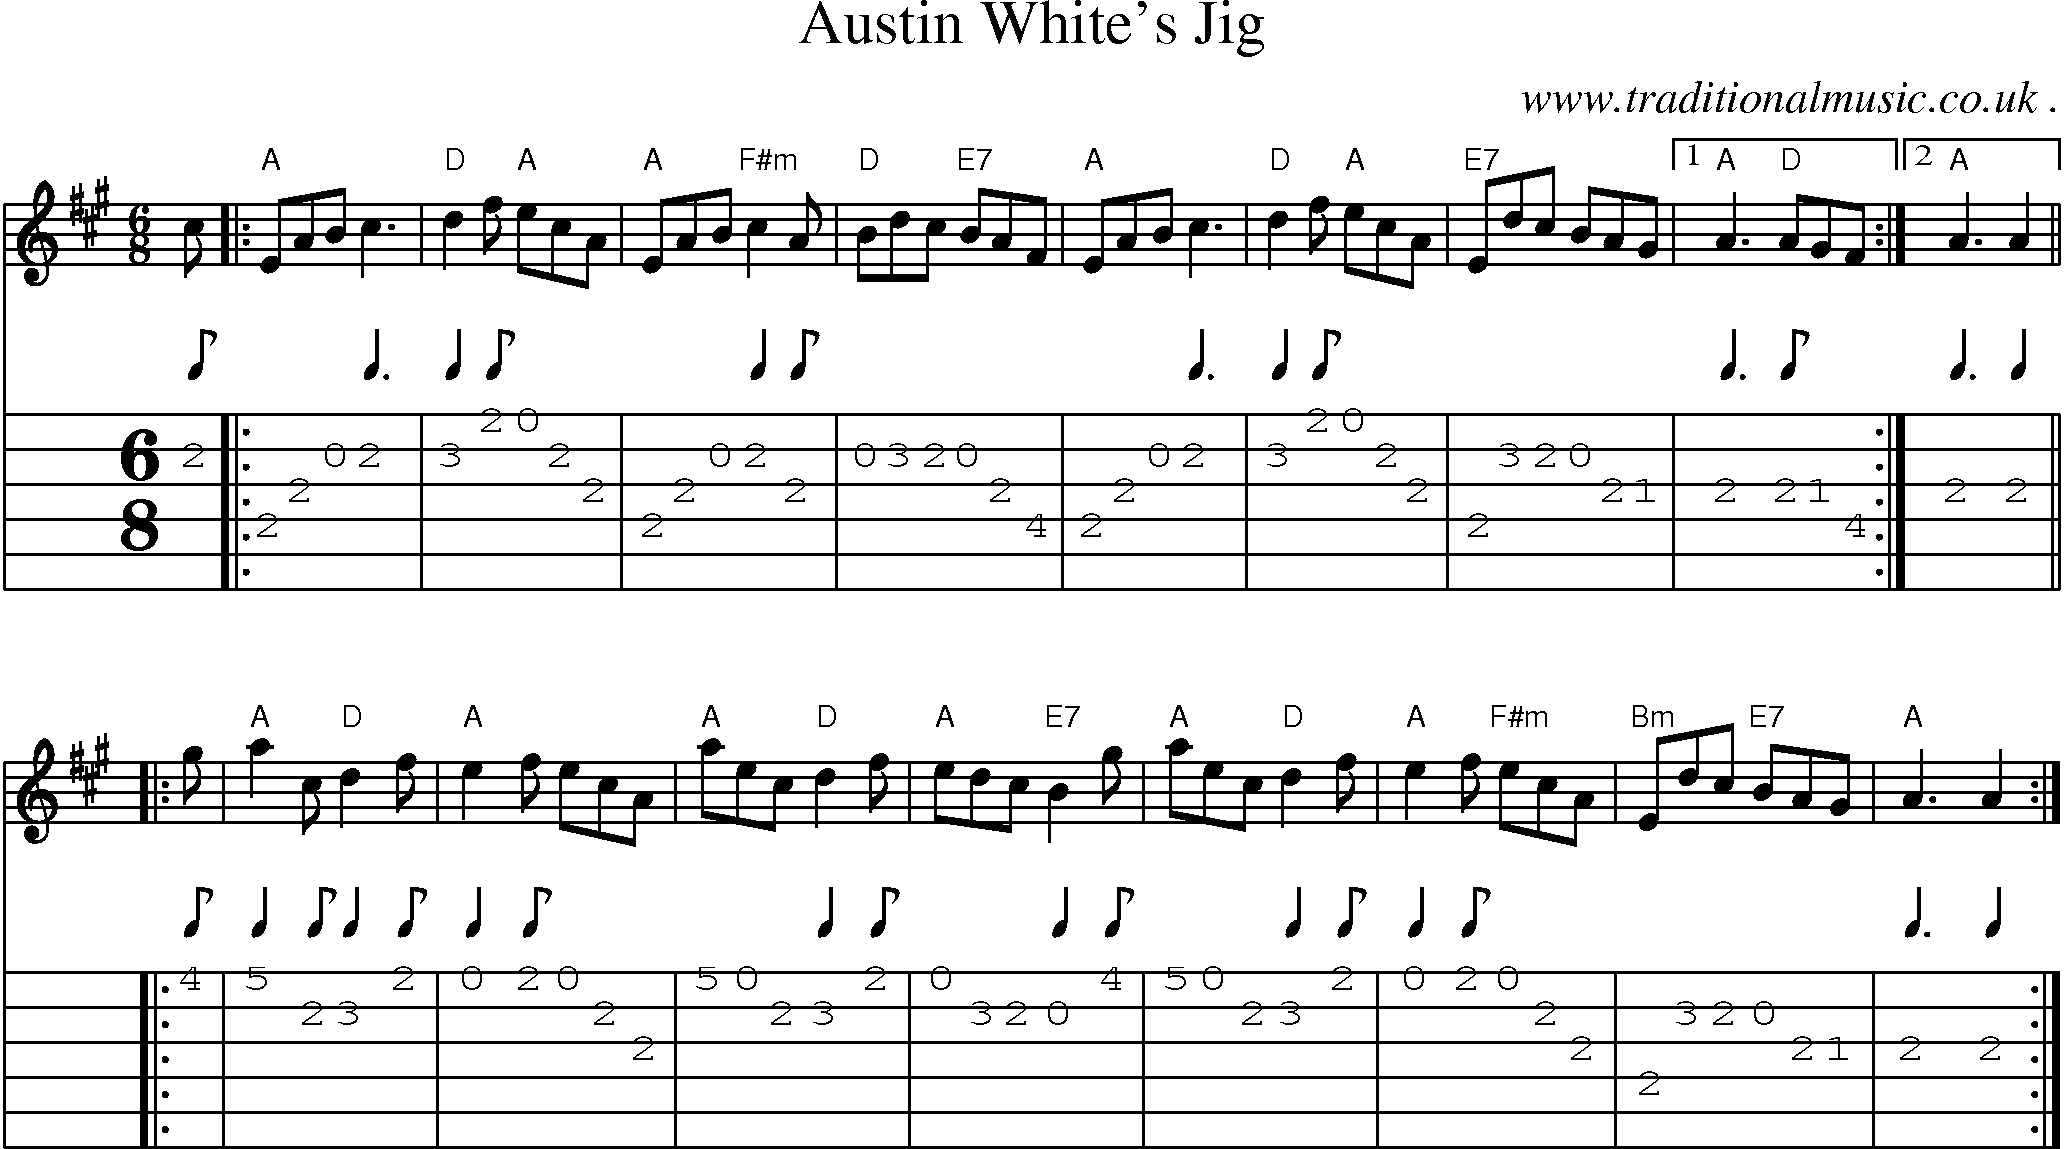 Sheet-music  score, Chords and Guitar Tabs for Austin Whites Jig